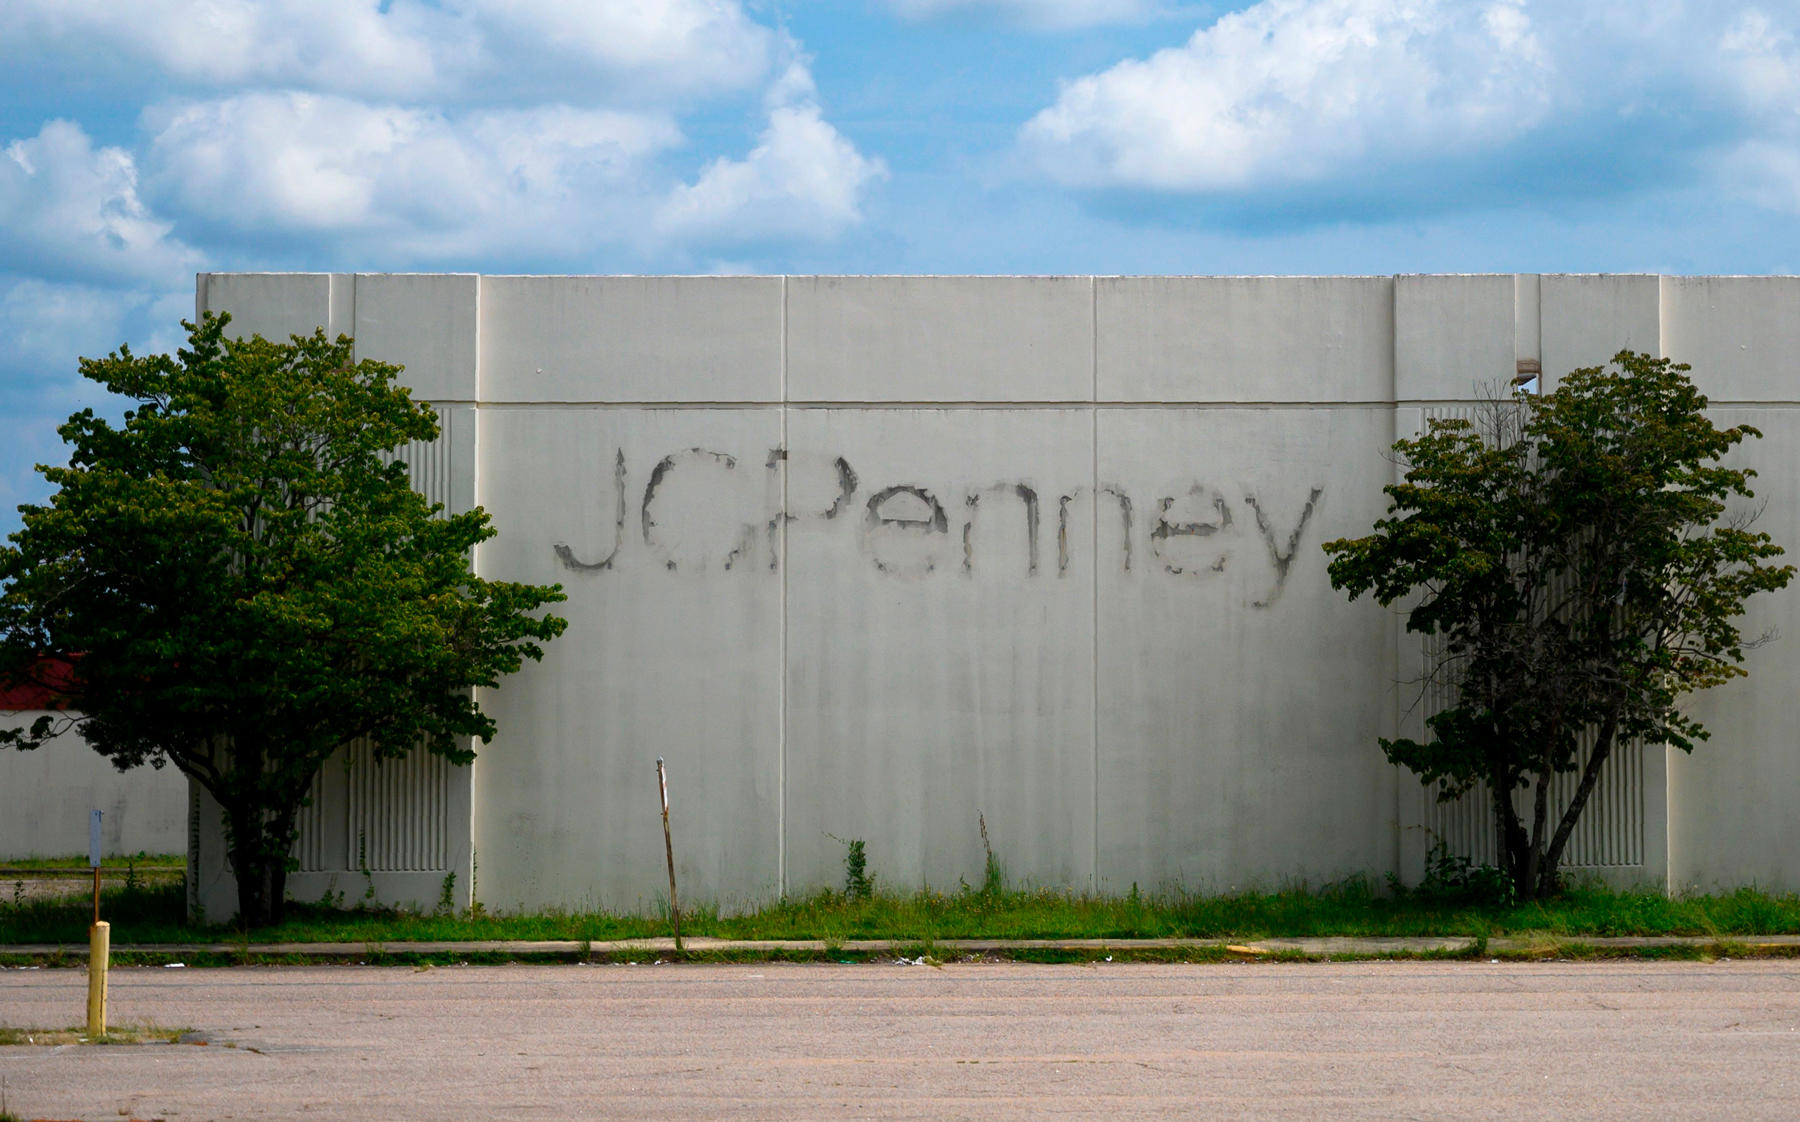 J.C. Penney is in advanced talks for bankruptcy financing as it faces financial pressure from the coronavirus pandemic. (Photo by ANDREW CABALLERO-REYNOLDS/AFP via Getty Images)